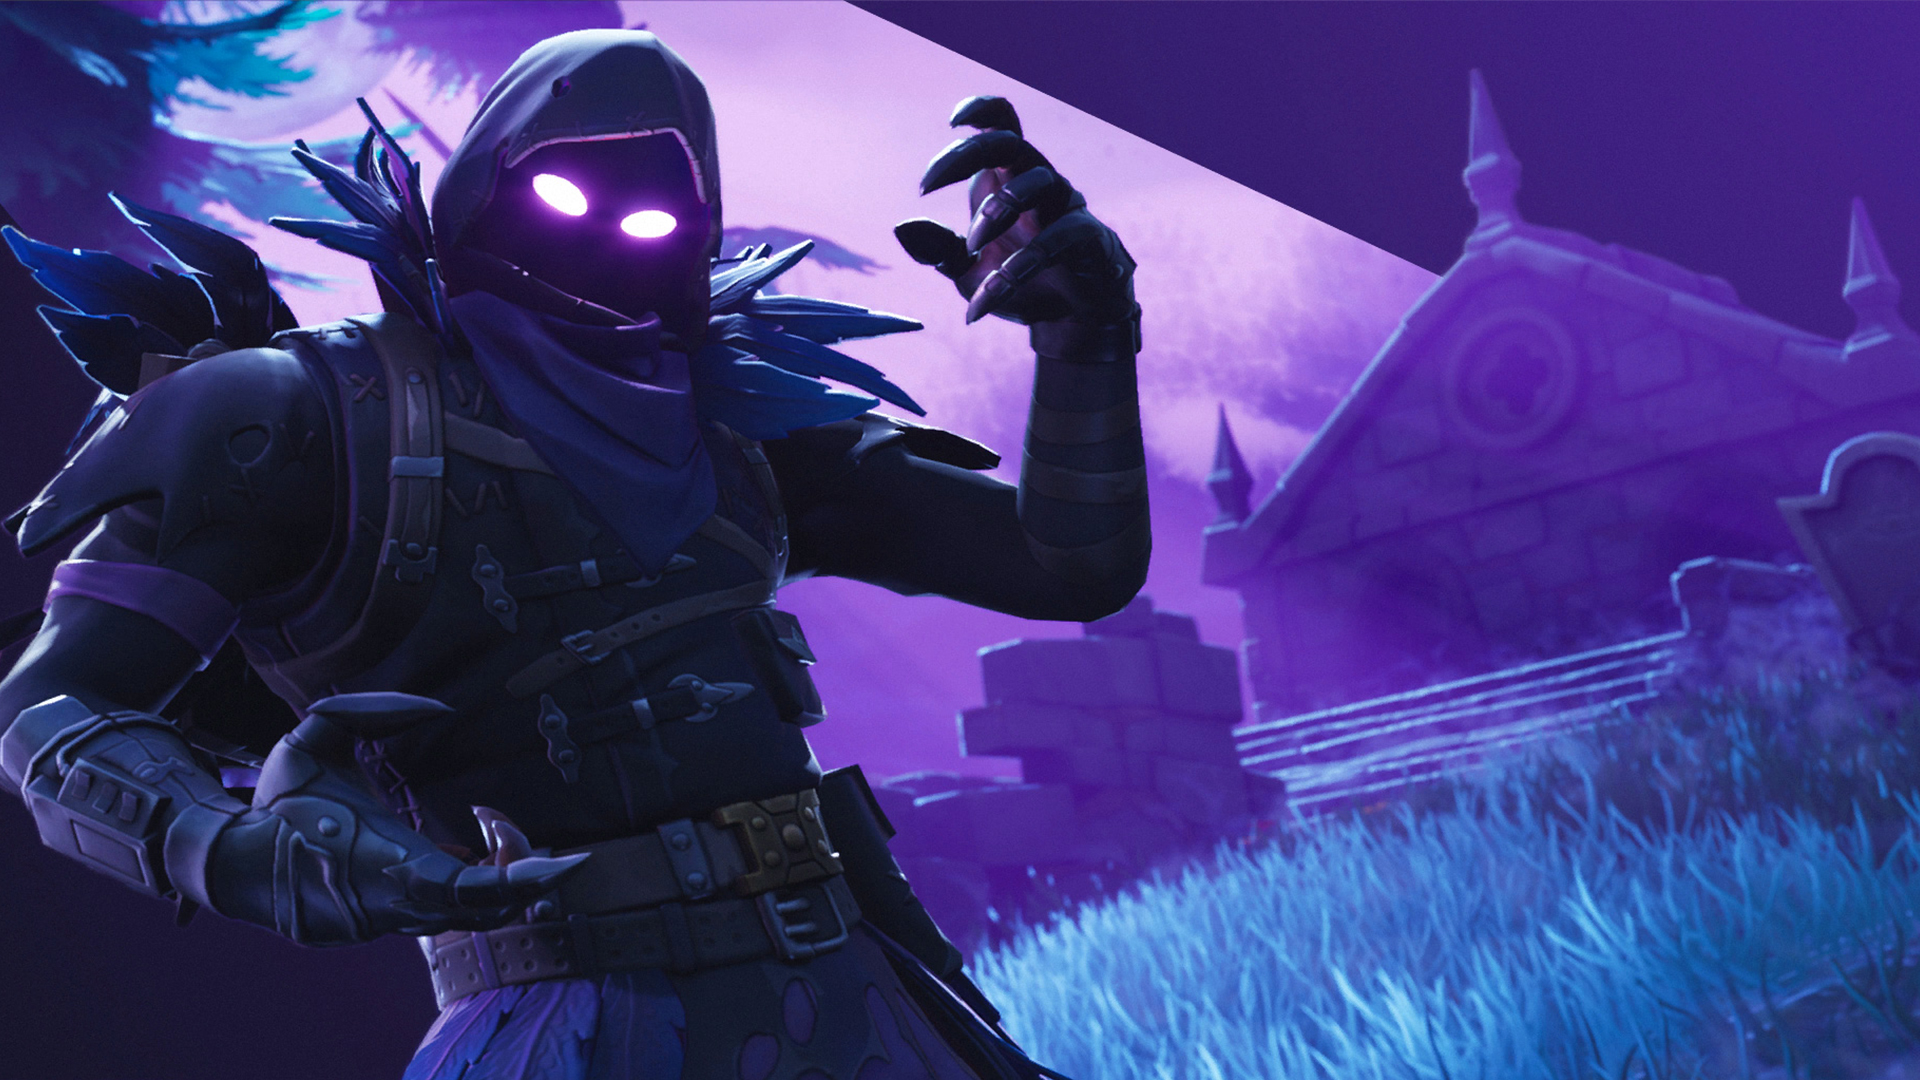 Fortnite Wallpapers  HD, iPhone, \u0026 Mobile Versions!  Pro Game Guides